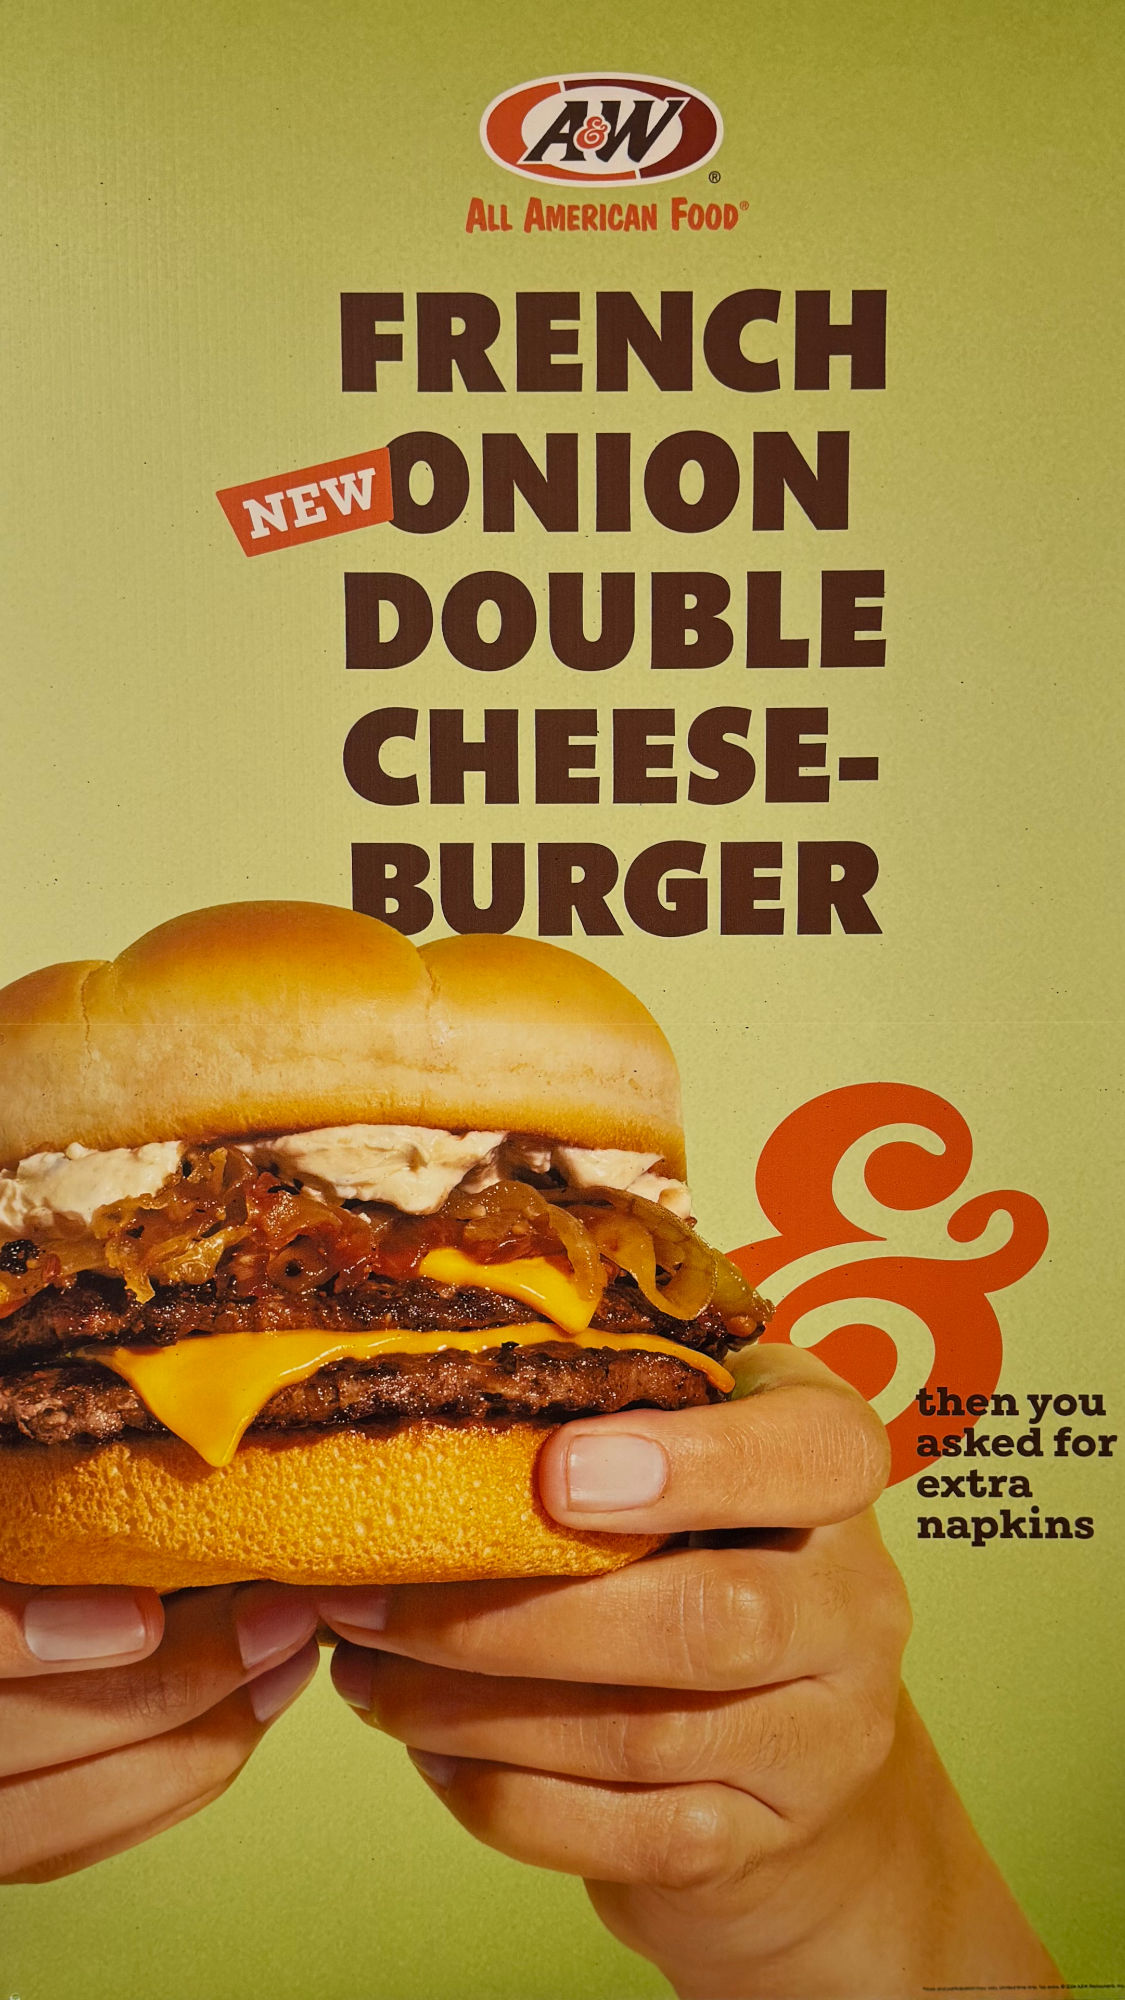 A&W French Onion Double Cheeseburger